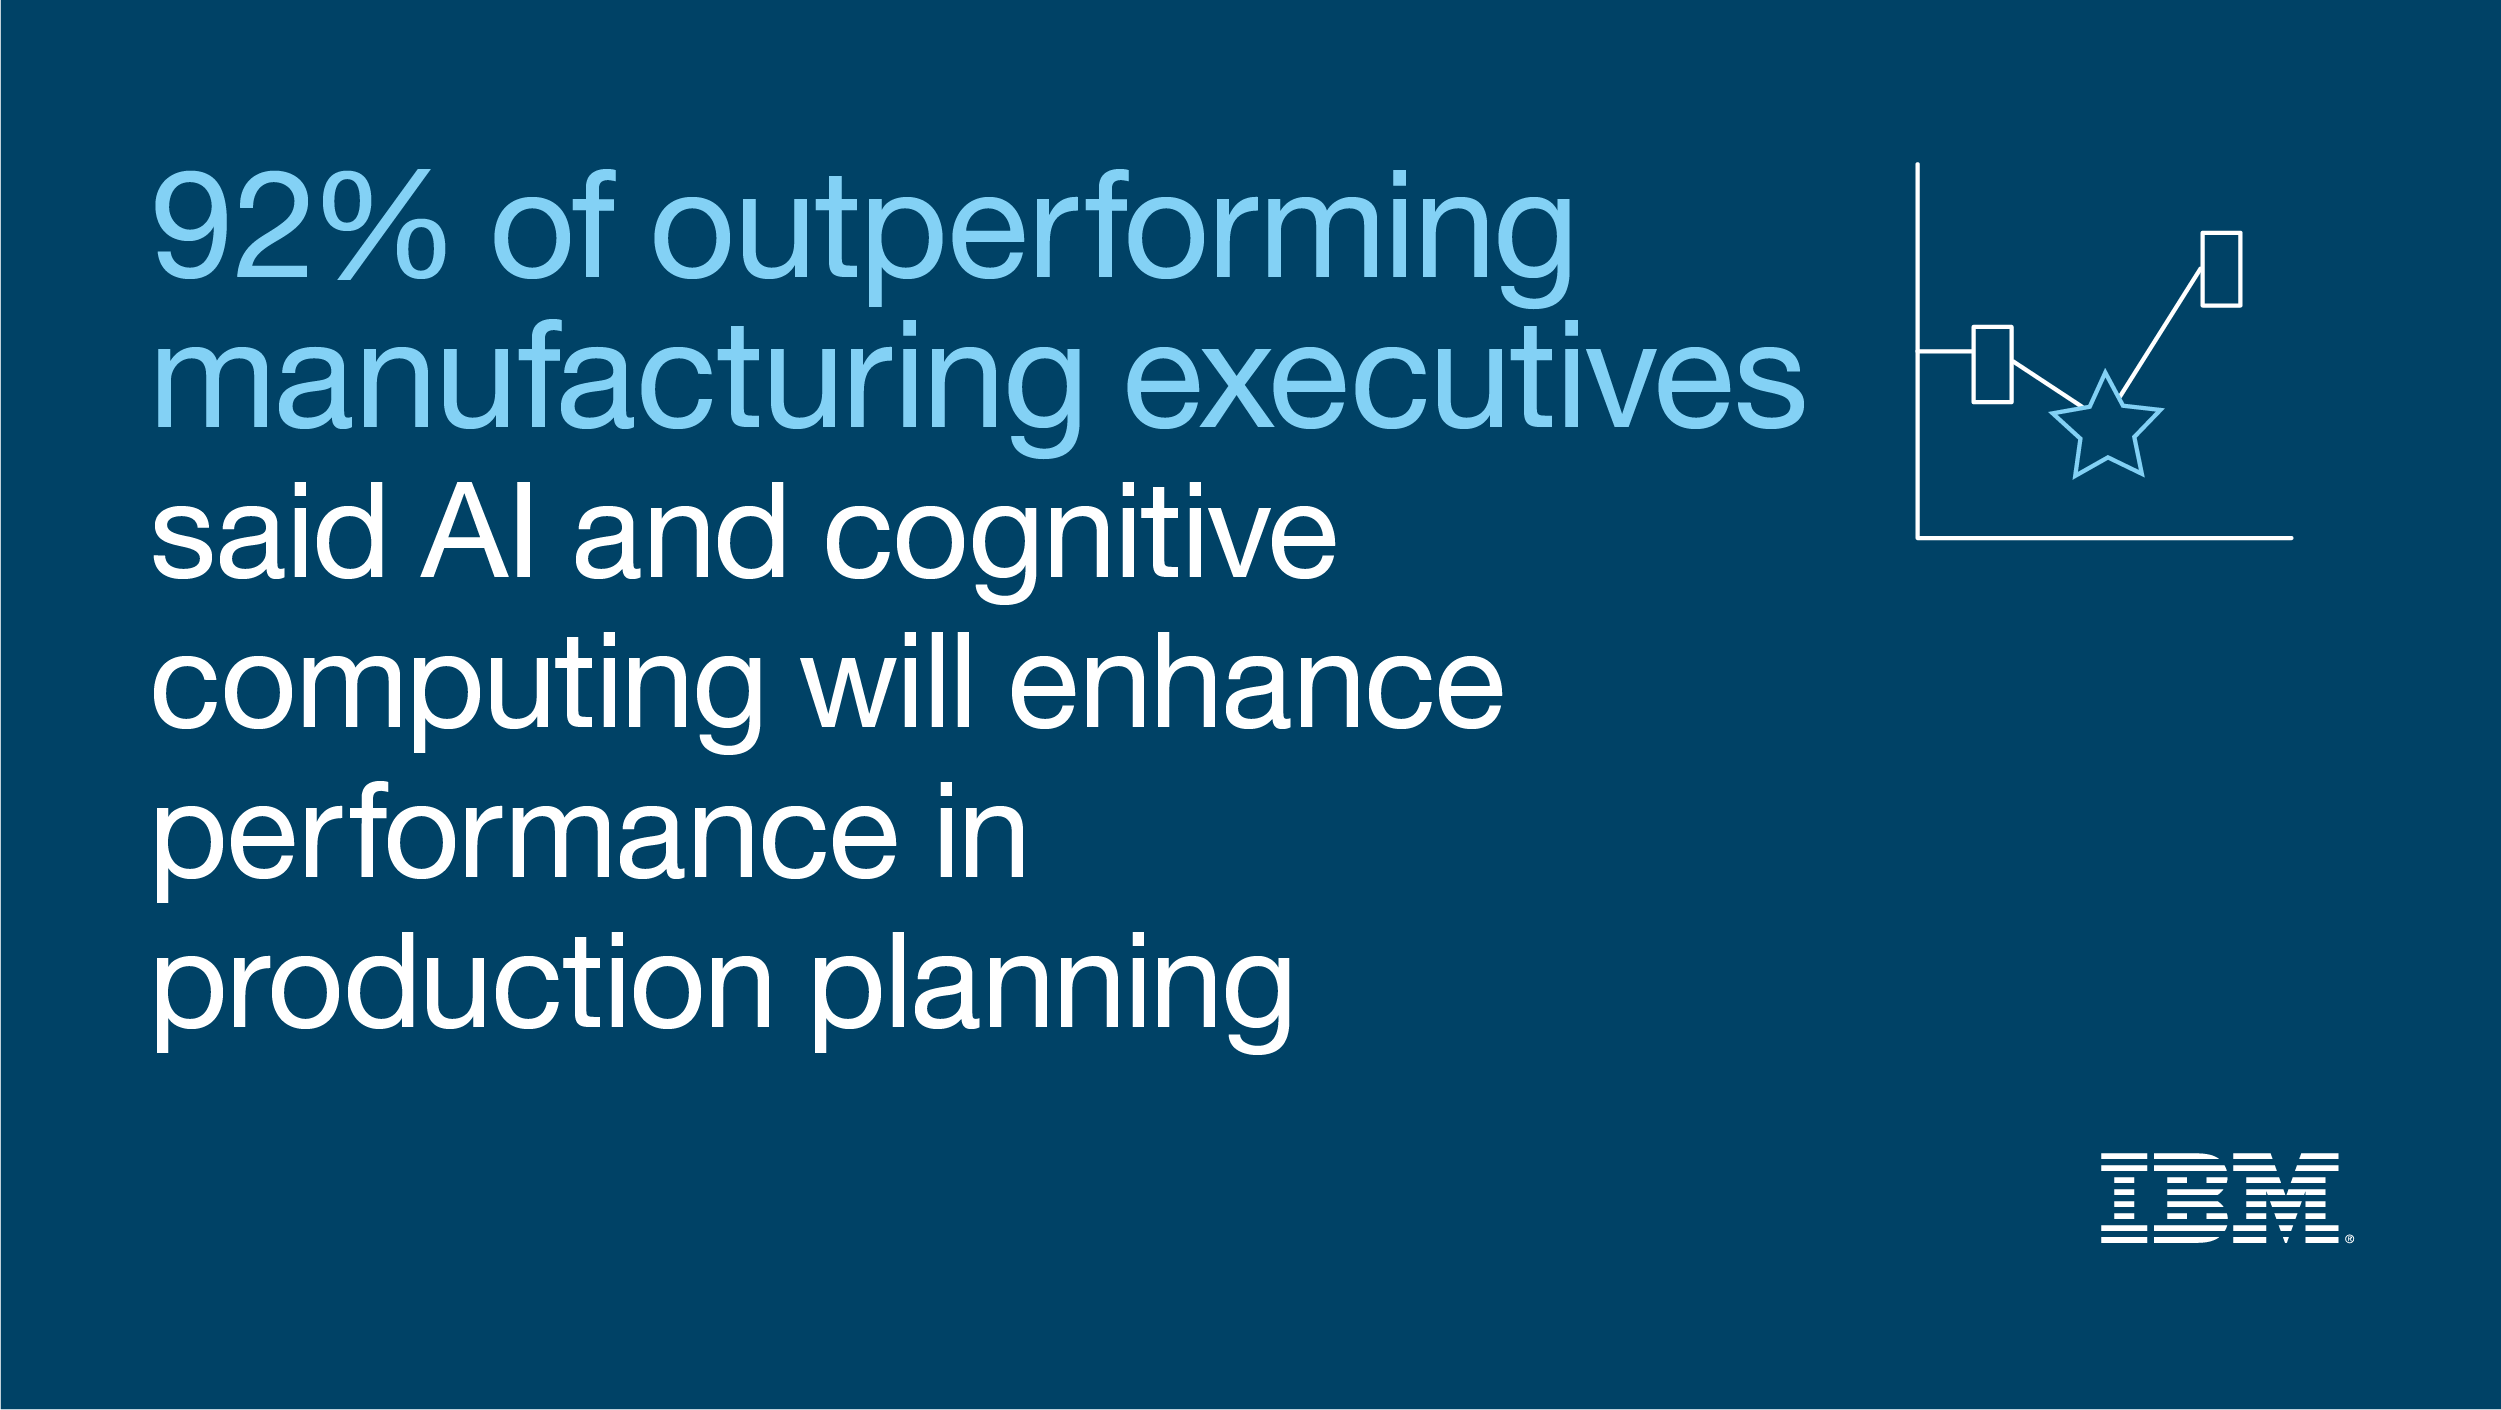 92% of outperforming manufacturing executives surveyed said AI and cognitive computing will enhance performance in production planning.